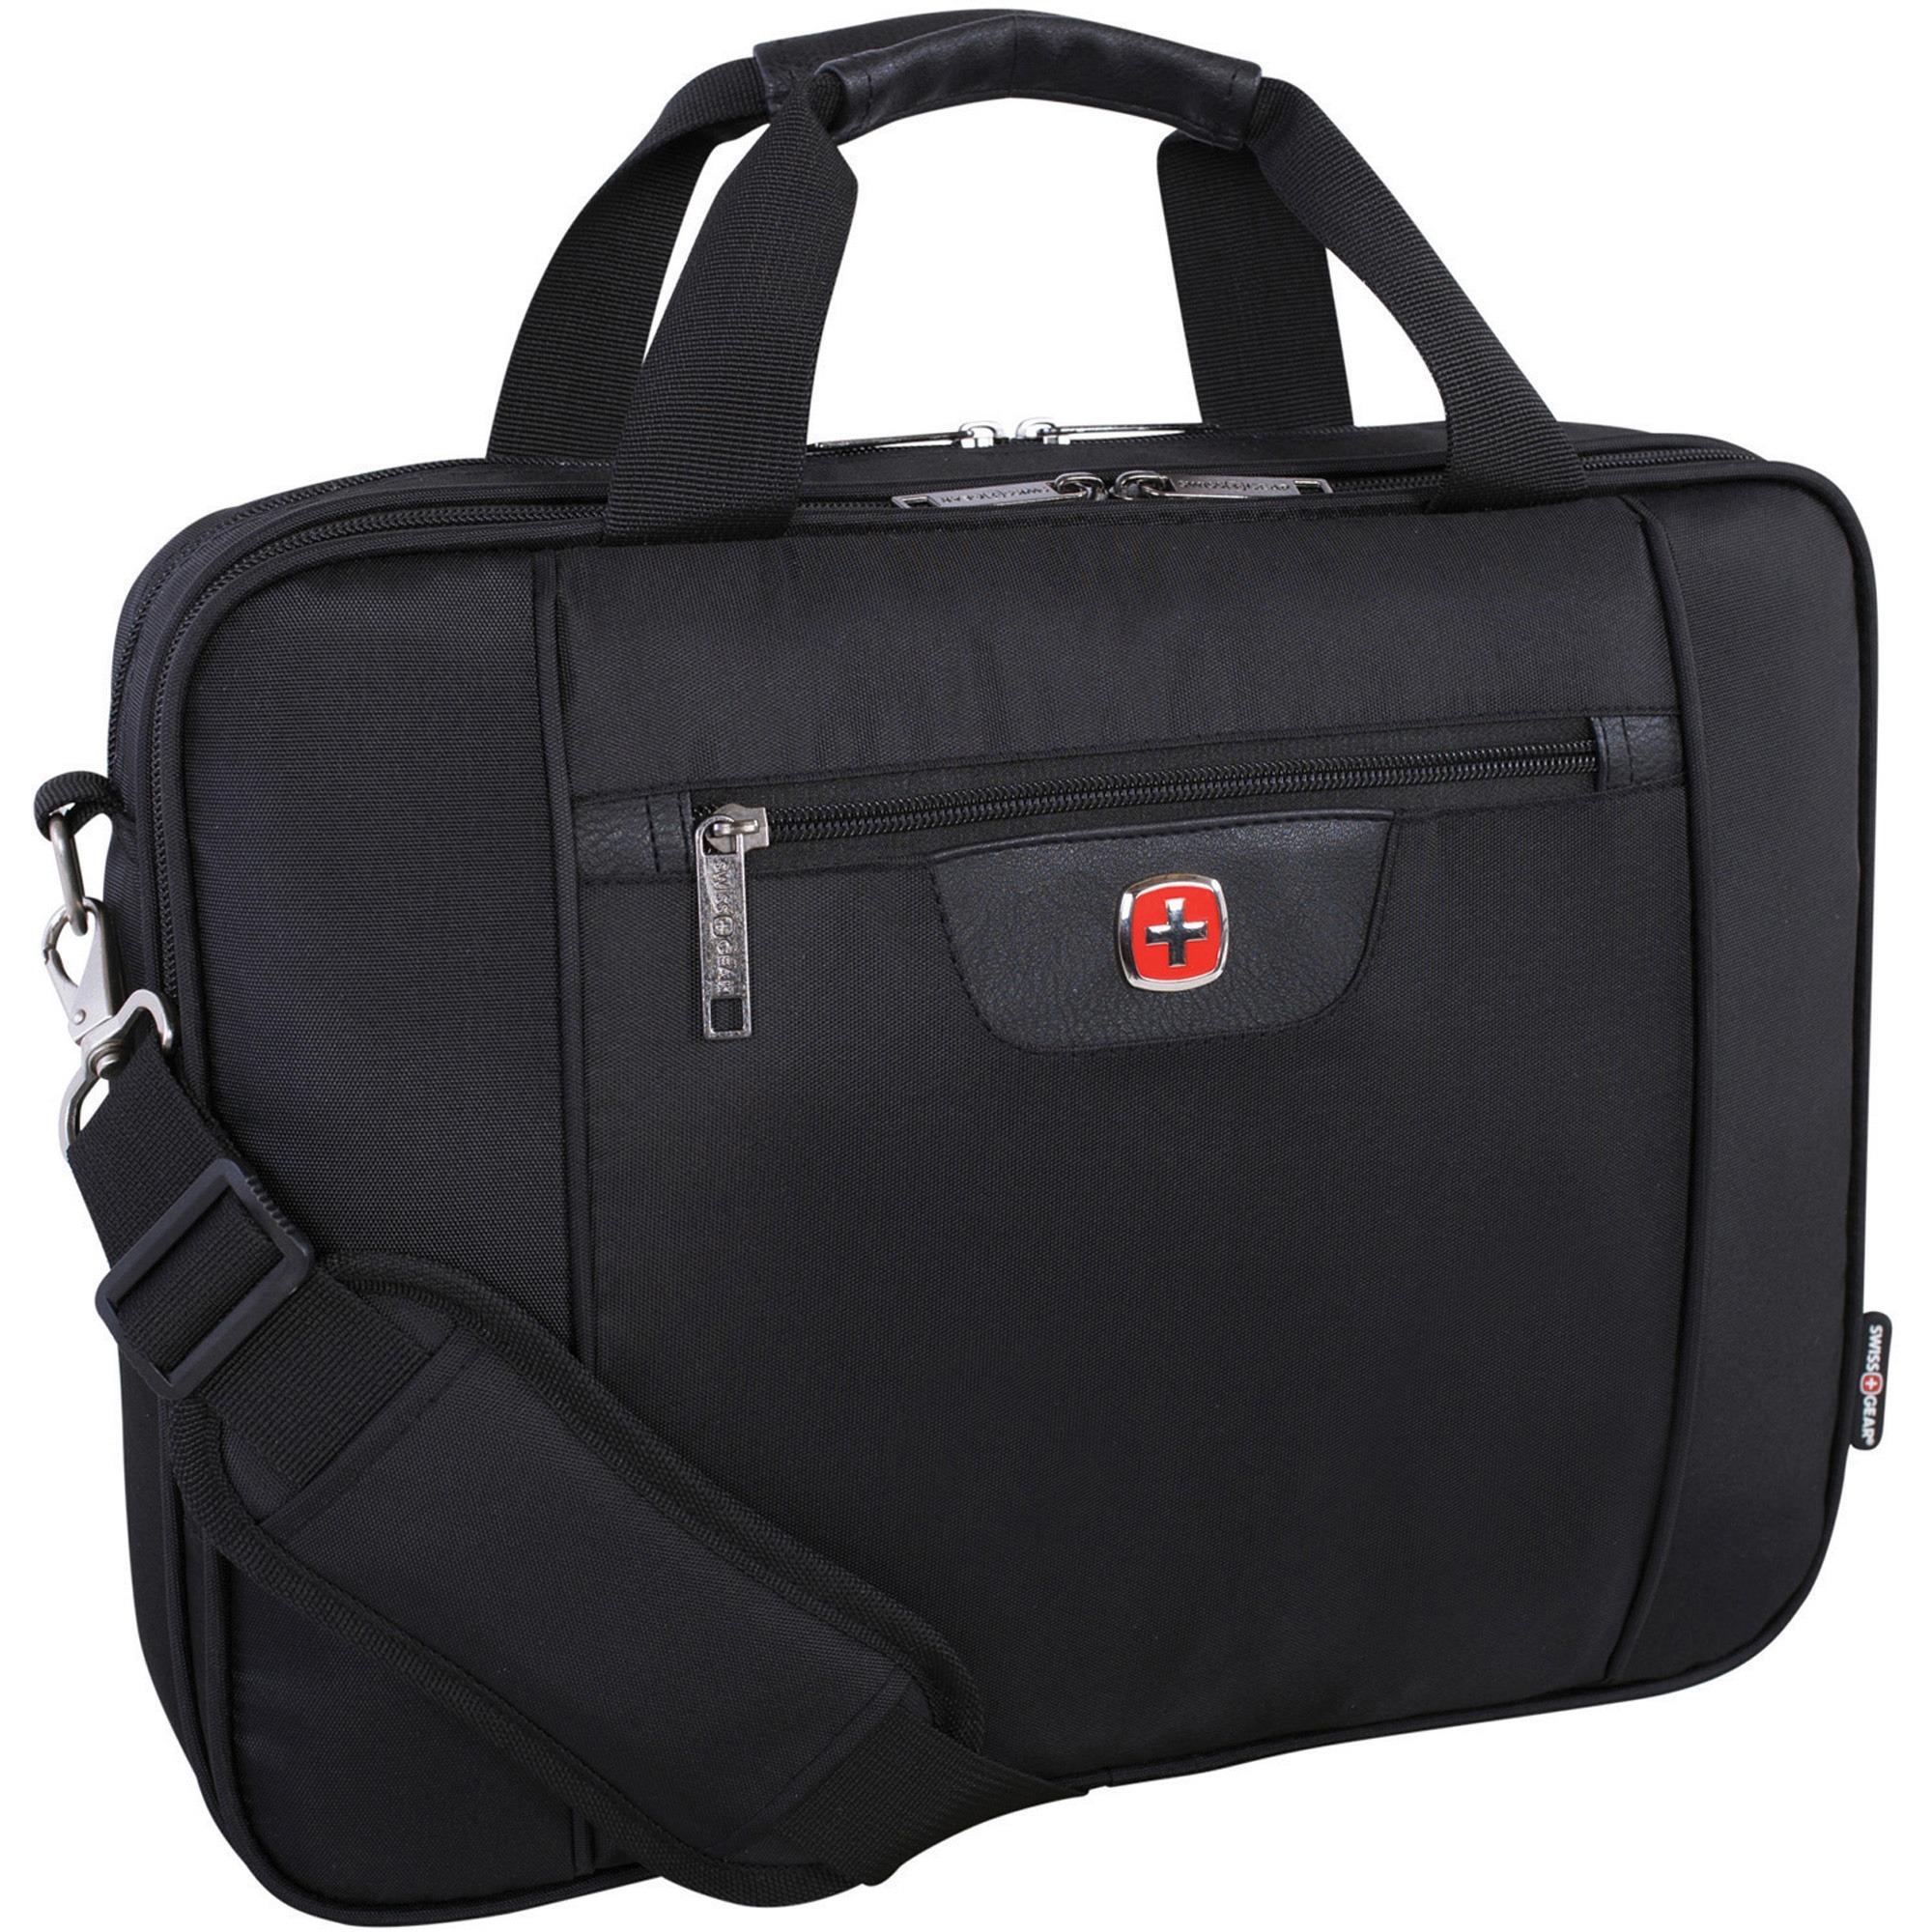 Swissgear SWA5117 Carrying Case (Briefcase) for 15.6